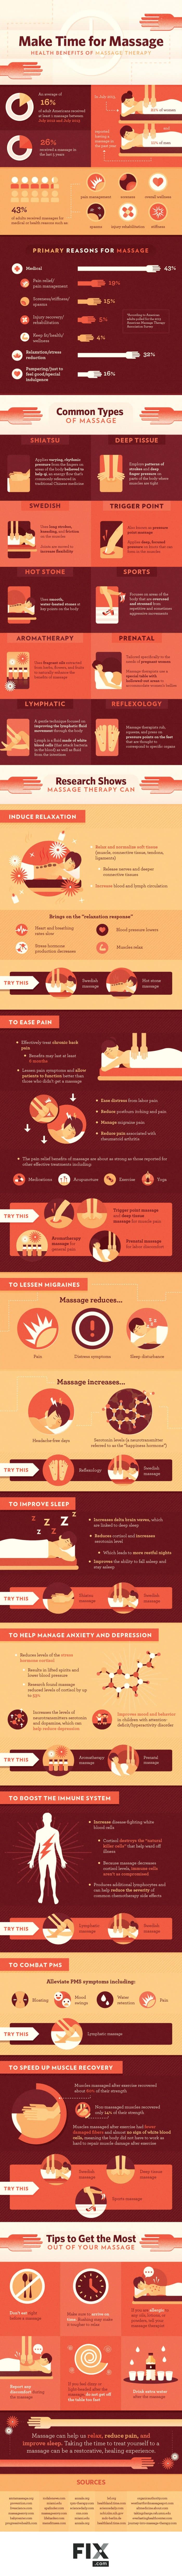 Health benefits of massage therapy infographic